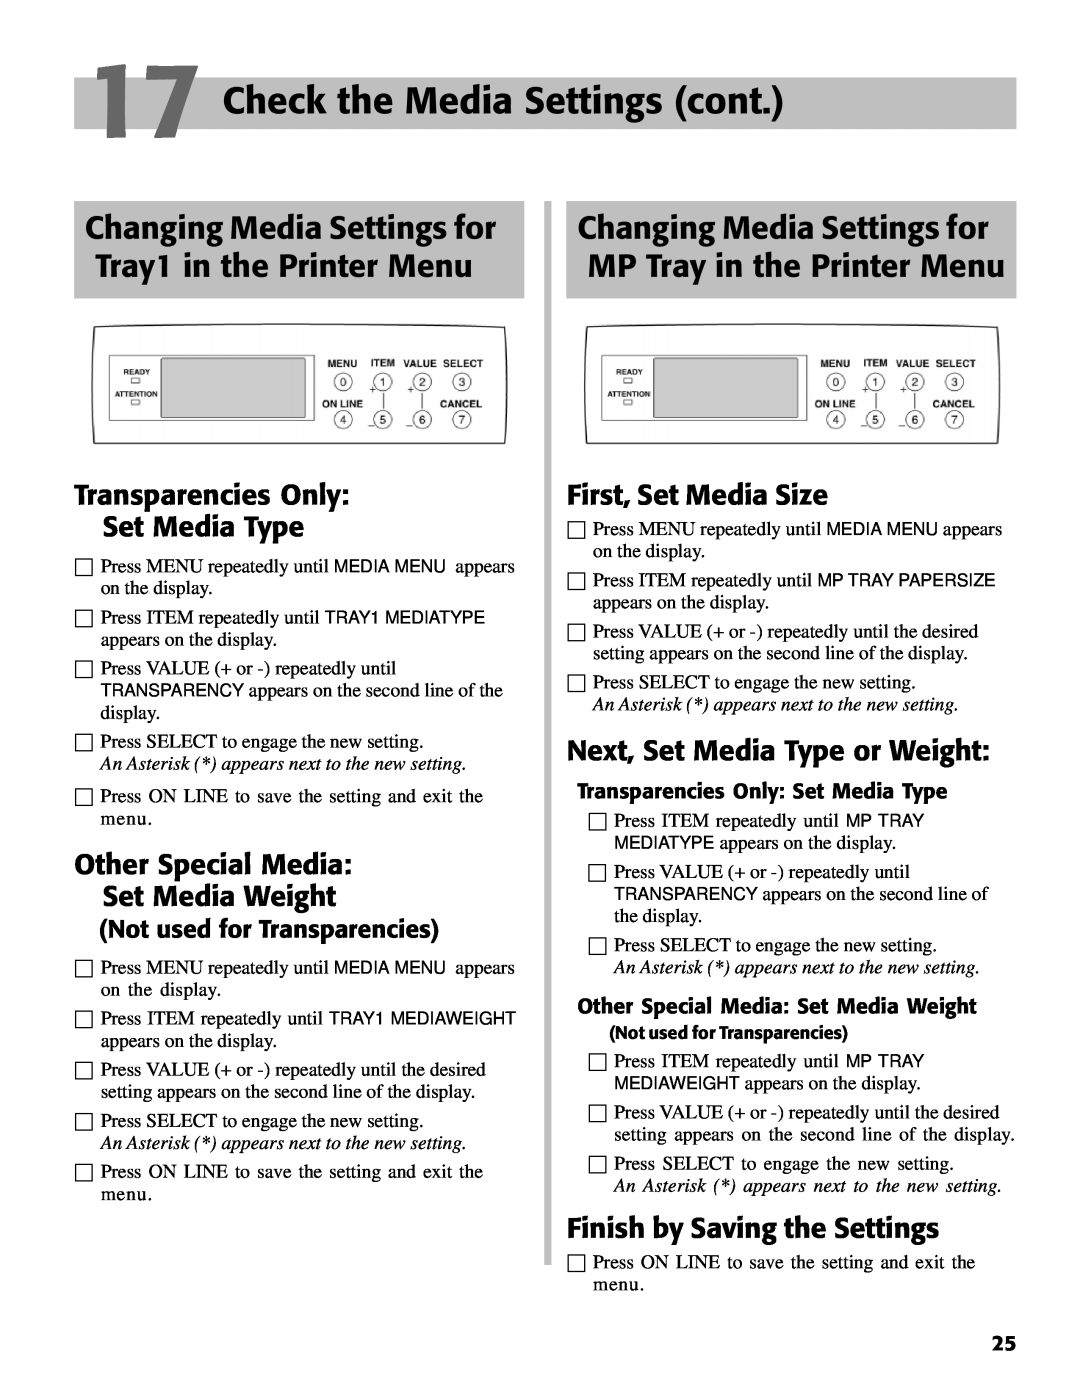 Oki C7000 Changing Media Settings for Tray1 in the Printer Menu, Changing Media Settings for MP Tray in the Printer Menu 